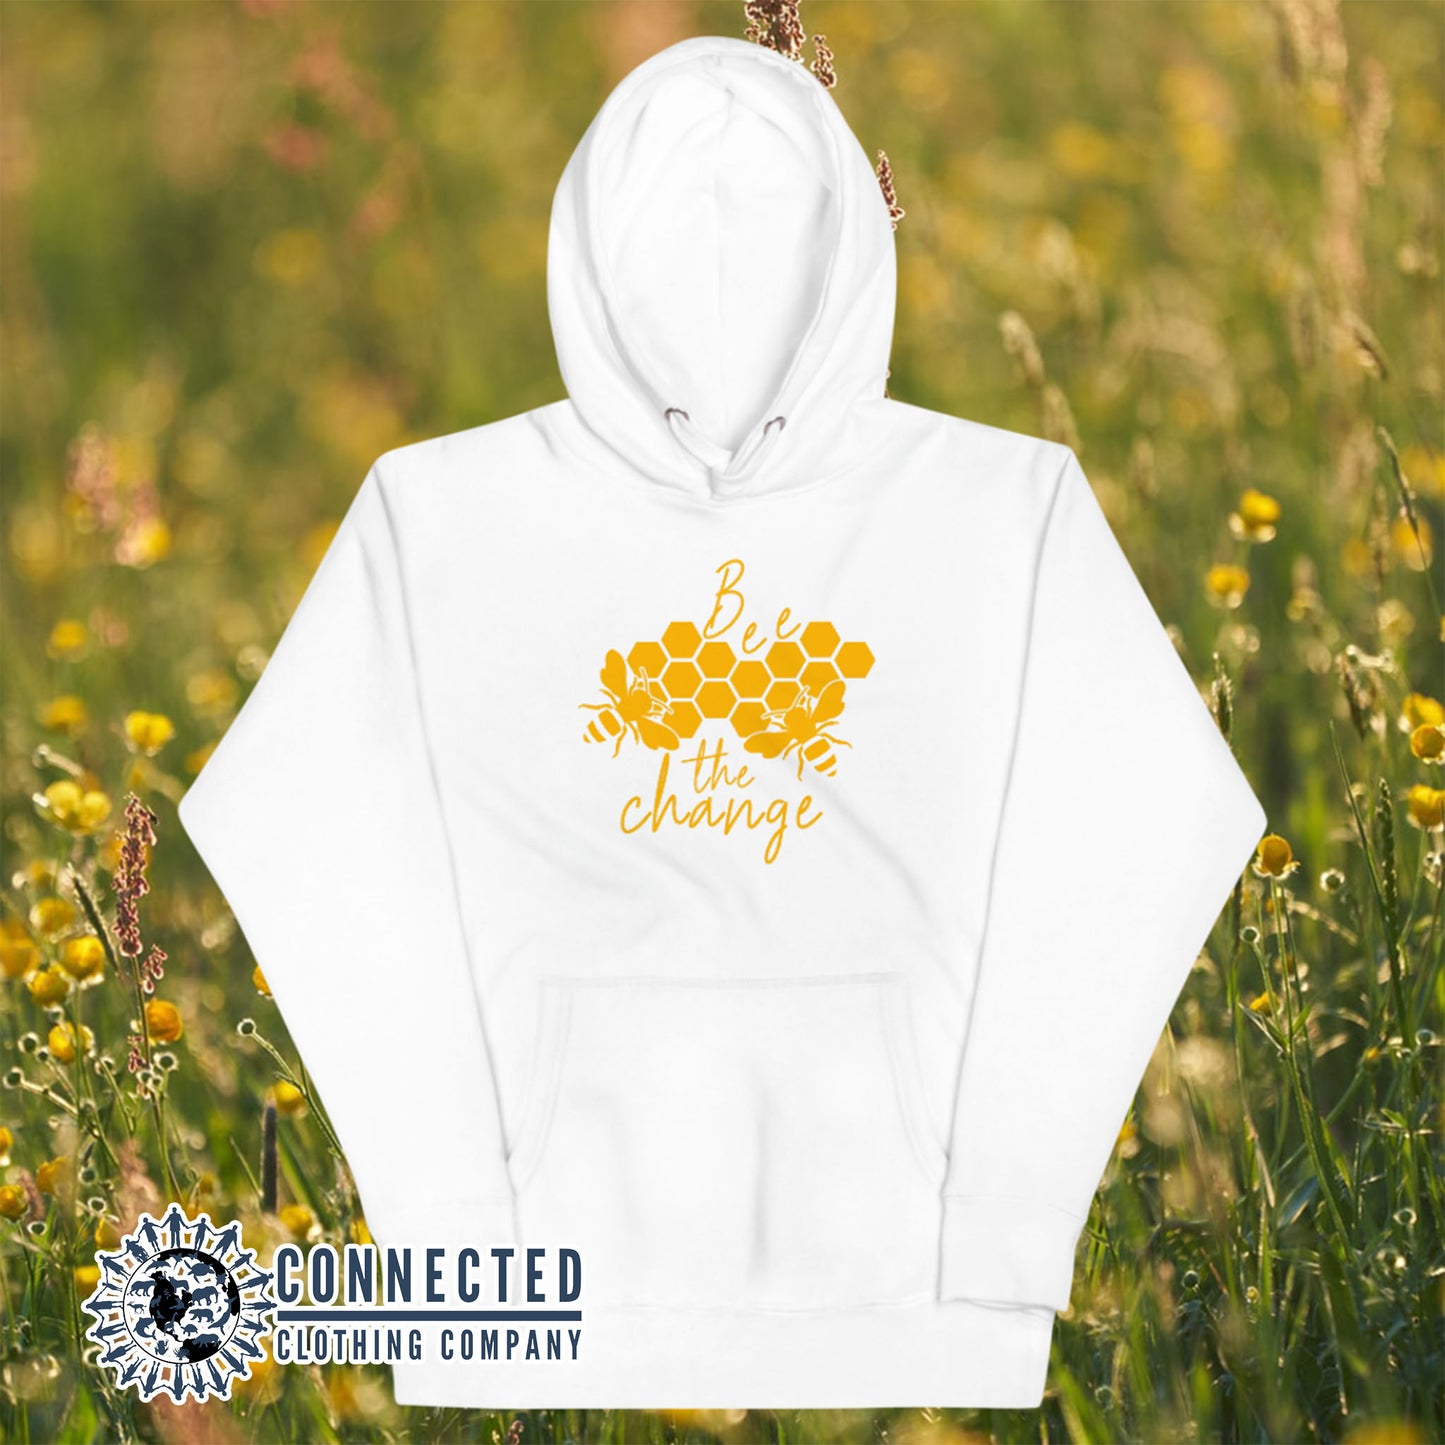 White Bee The Change Unisex Hoodie - Connected Clothing Company - Ethically and Sustainably Made - 10% donated to The Honeybee Conservancy